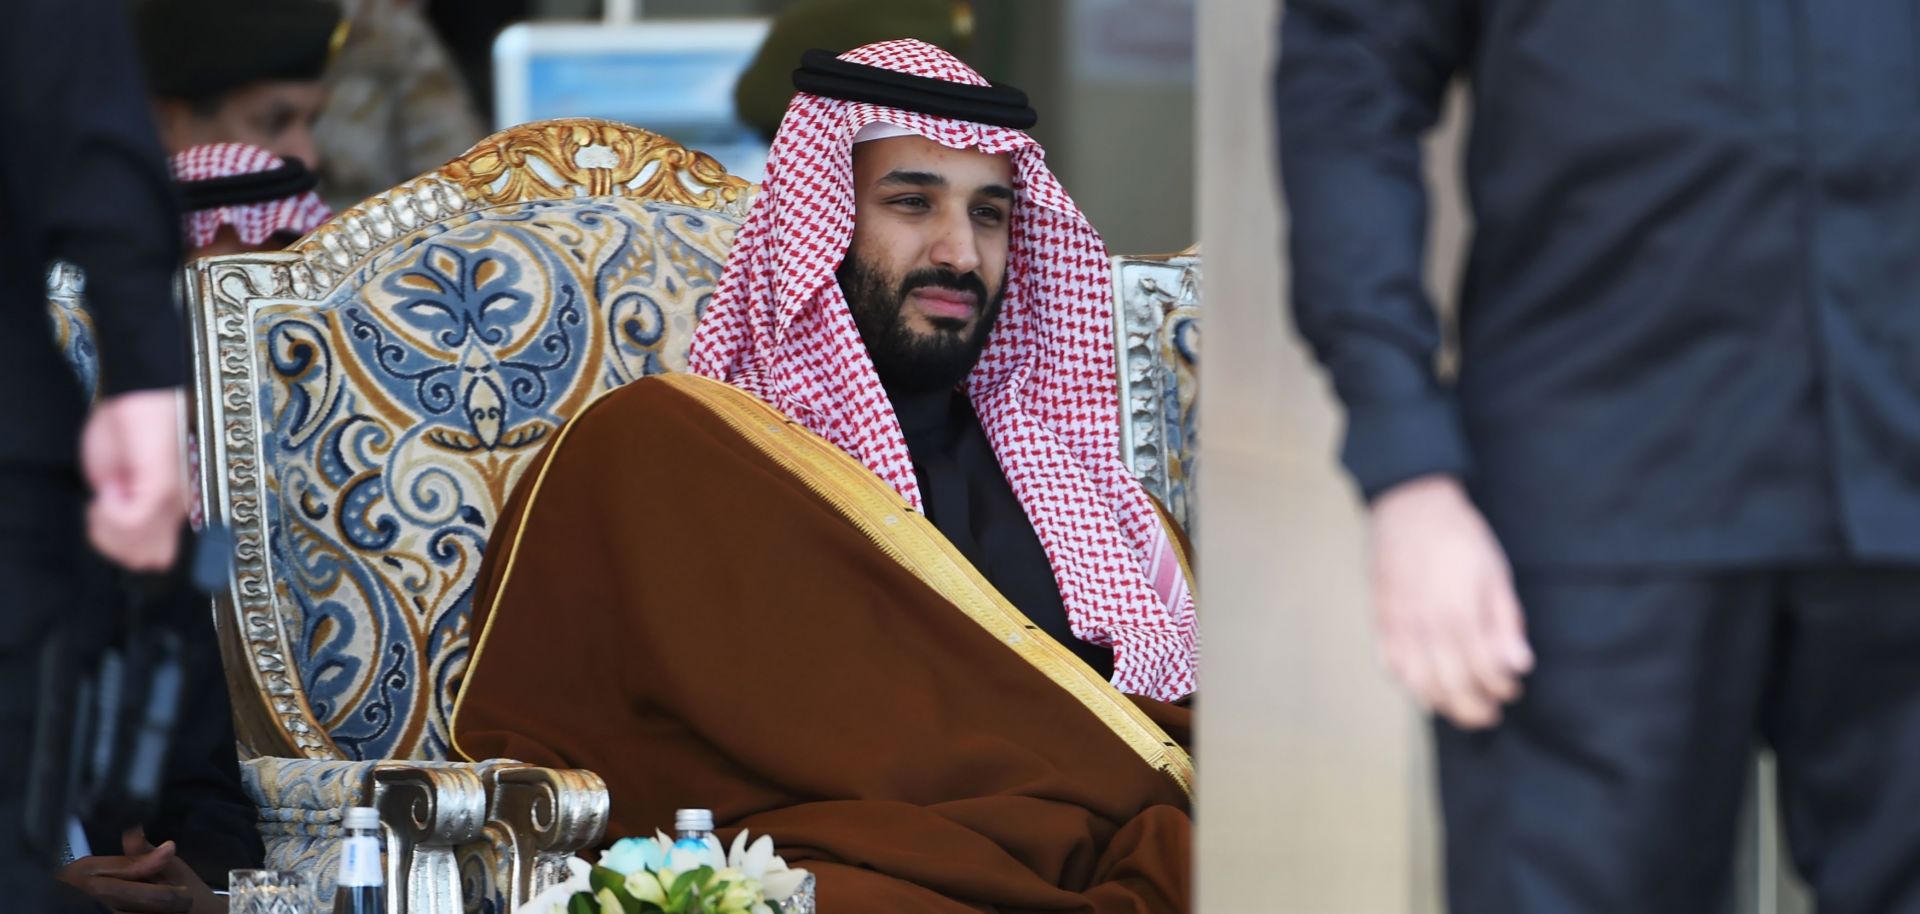 Hints of discord between the new Saudi crown prince, Mohammed bin Salman, and the former crown prince, Mohammed bin Nayef, became clear as far back as 2012.